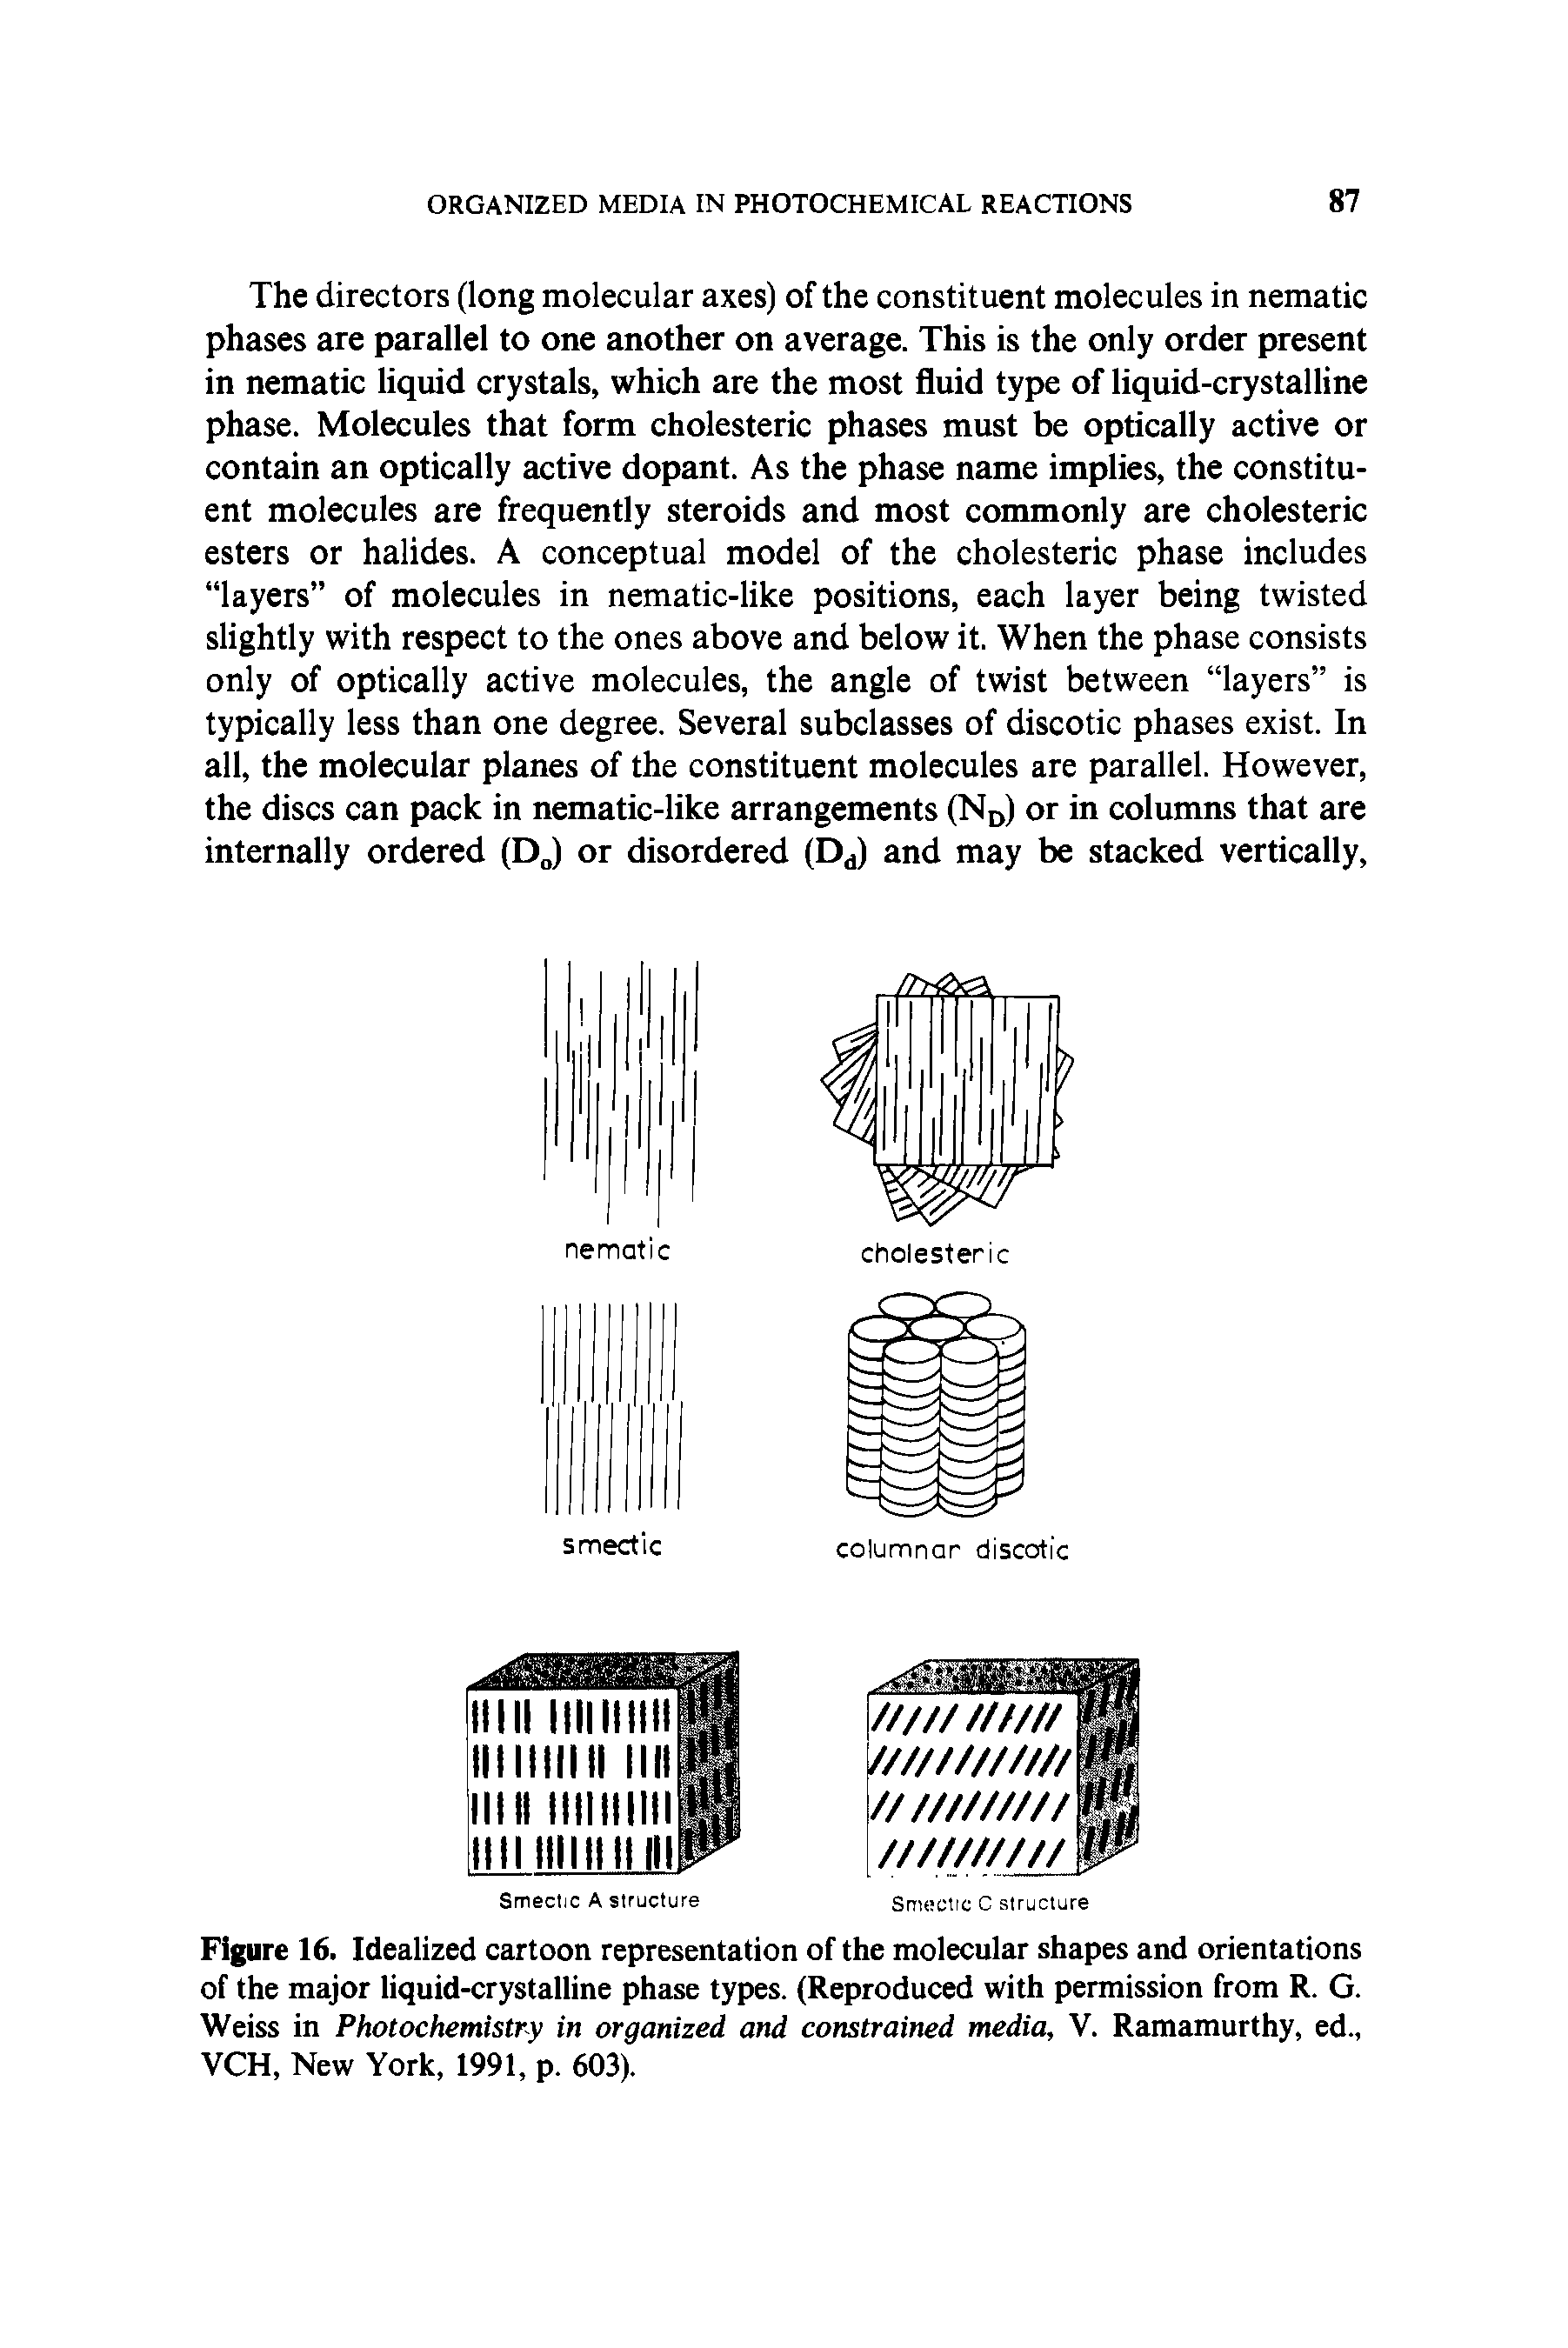 Figure 16. Idealized cartoon representation of the molecular shapes and orientations of the major liquid-crystalline phase types. (Reproduced with permission from R. G. Weiss in Photochemistry in organized and constrained media, V. Ramamurthy, ed., VCH, New York, 1991, p. 603).